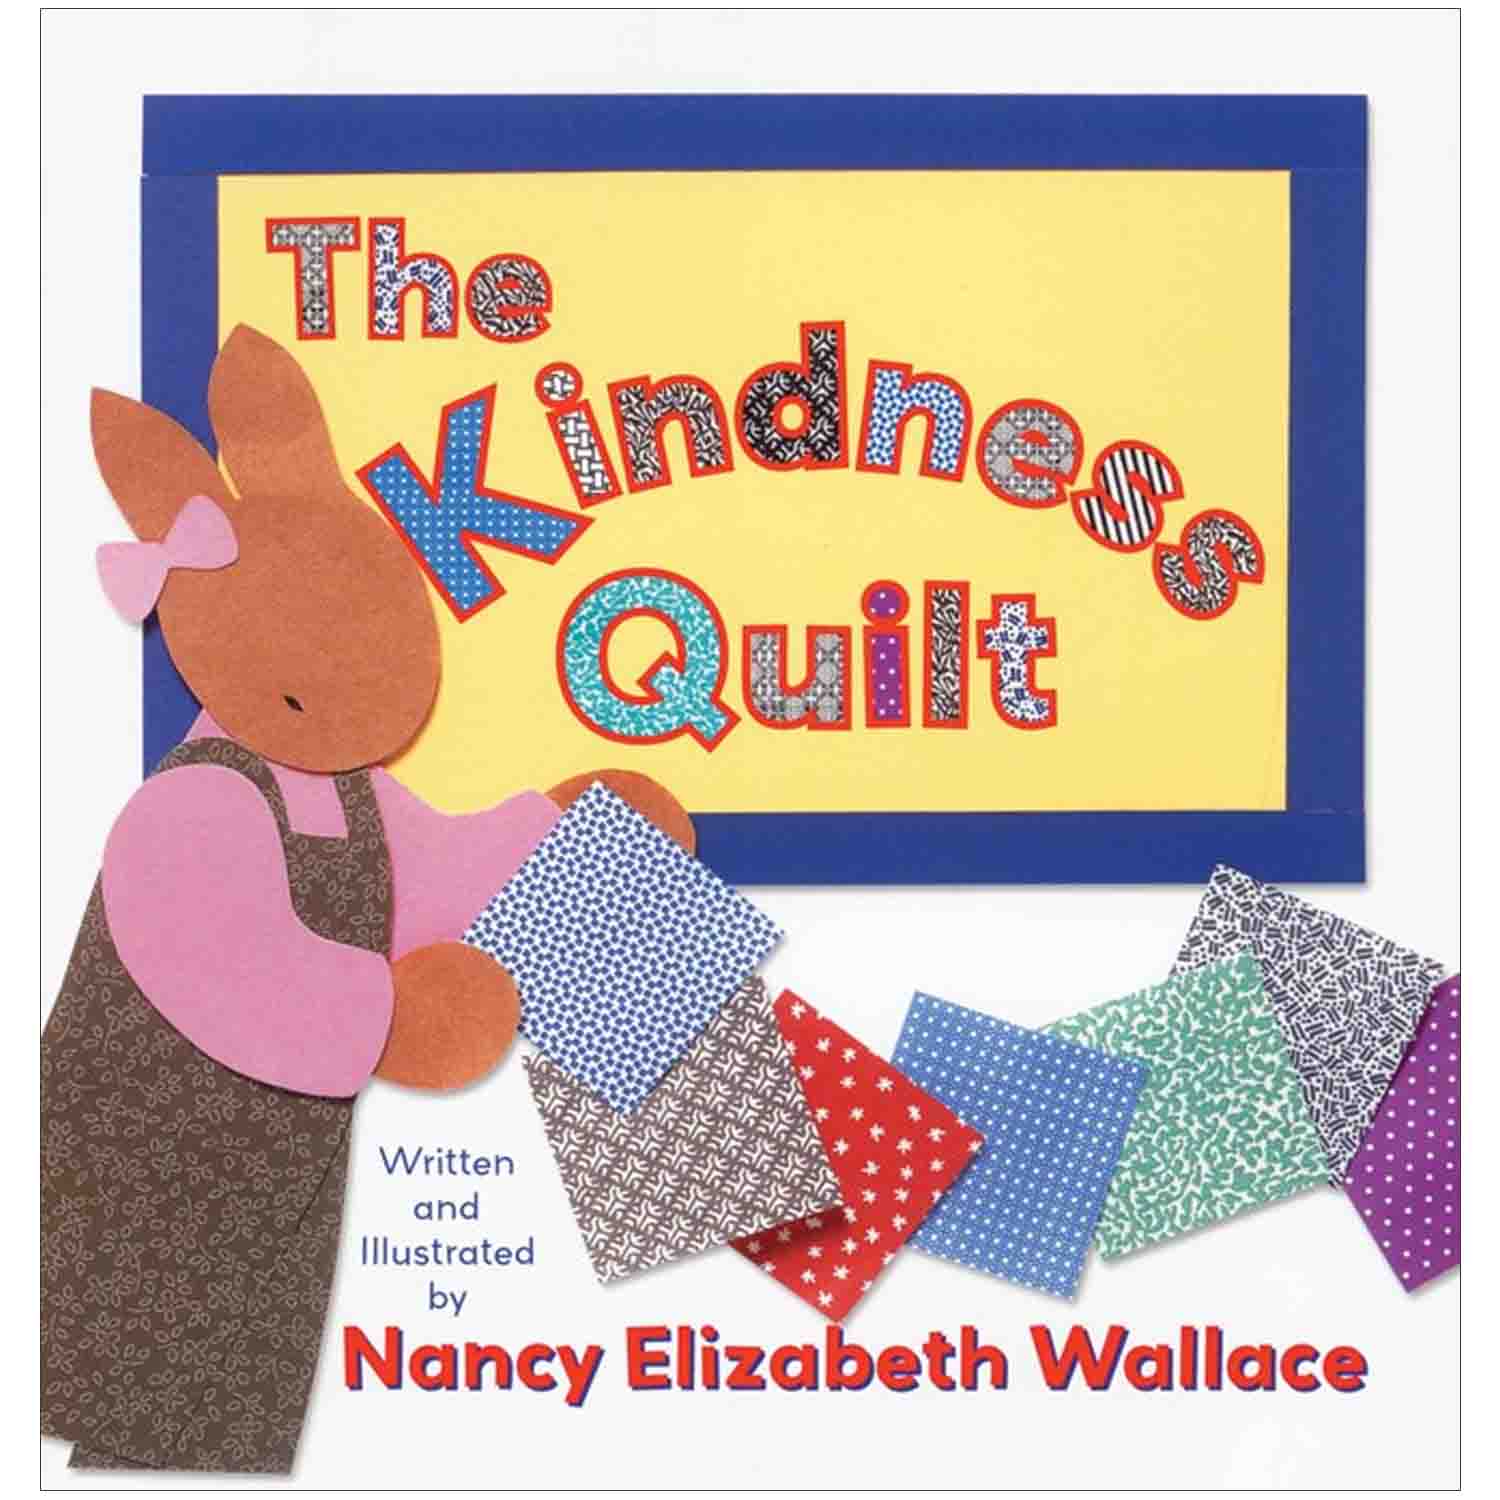 The Kindness Quilt